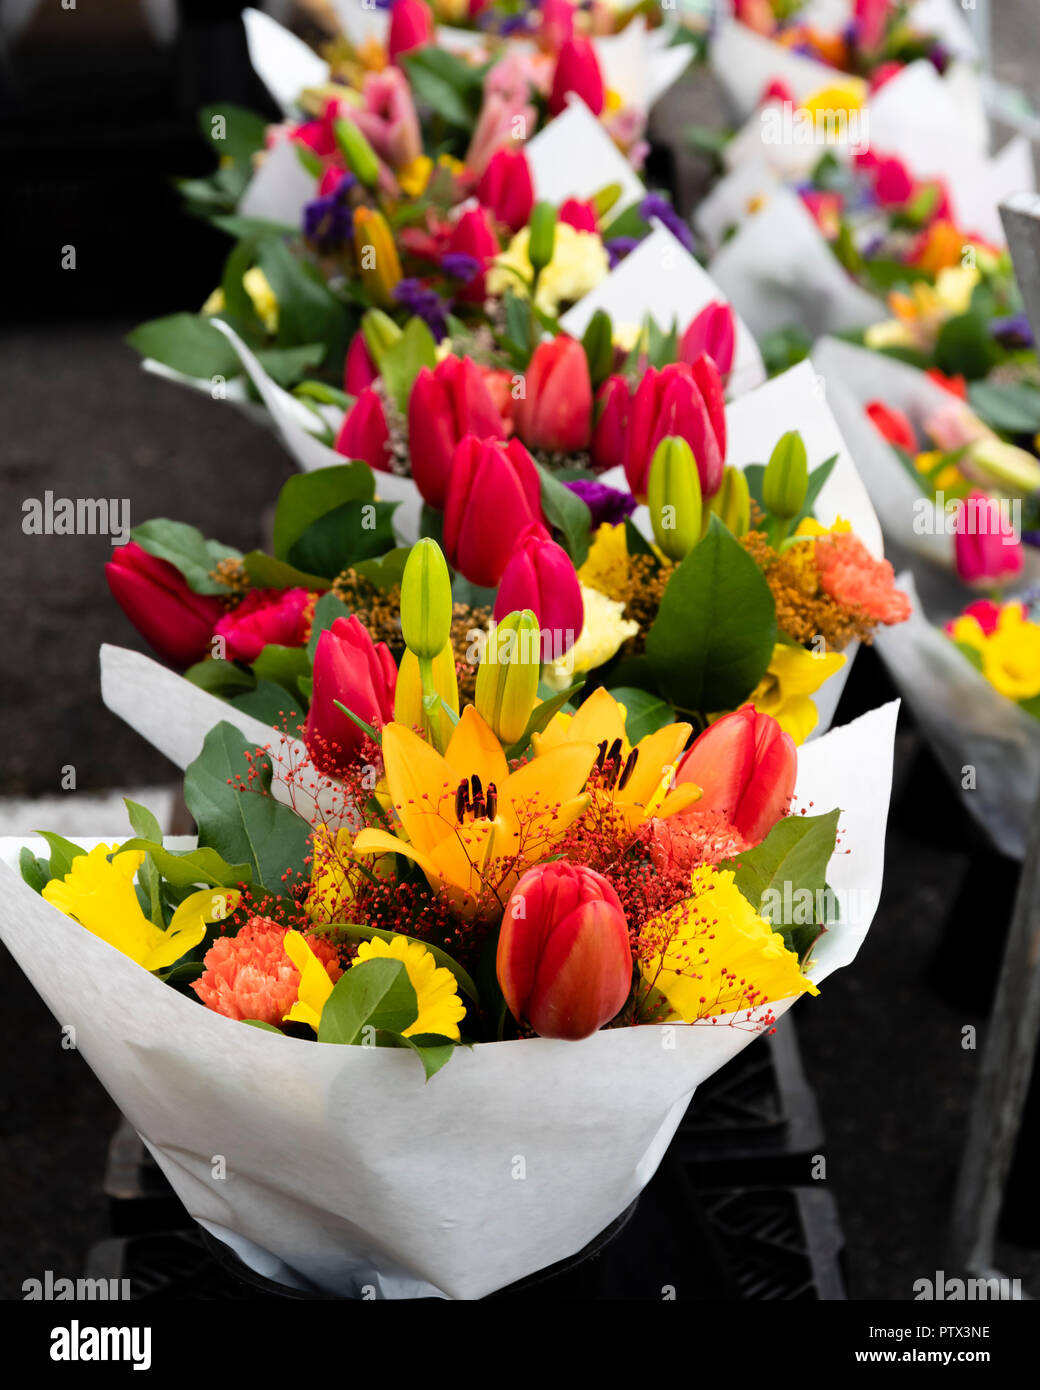 Fresh flower bouquets on display at the farmers market Stock Photo